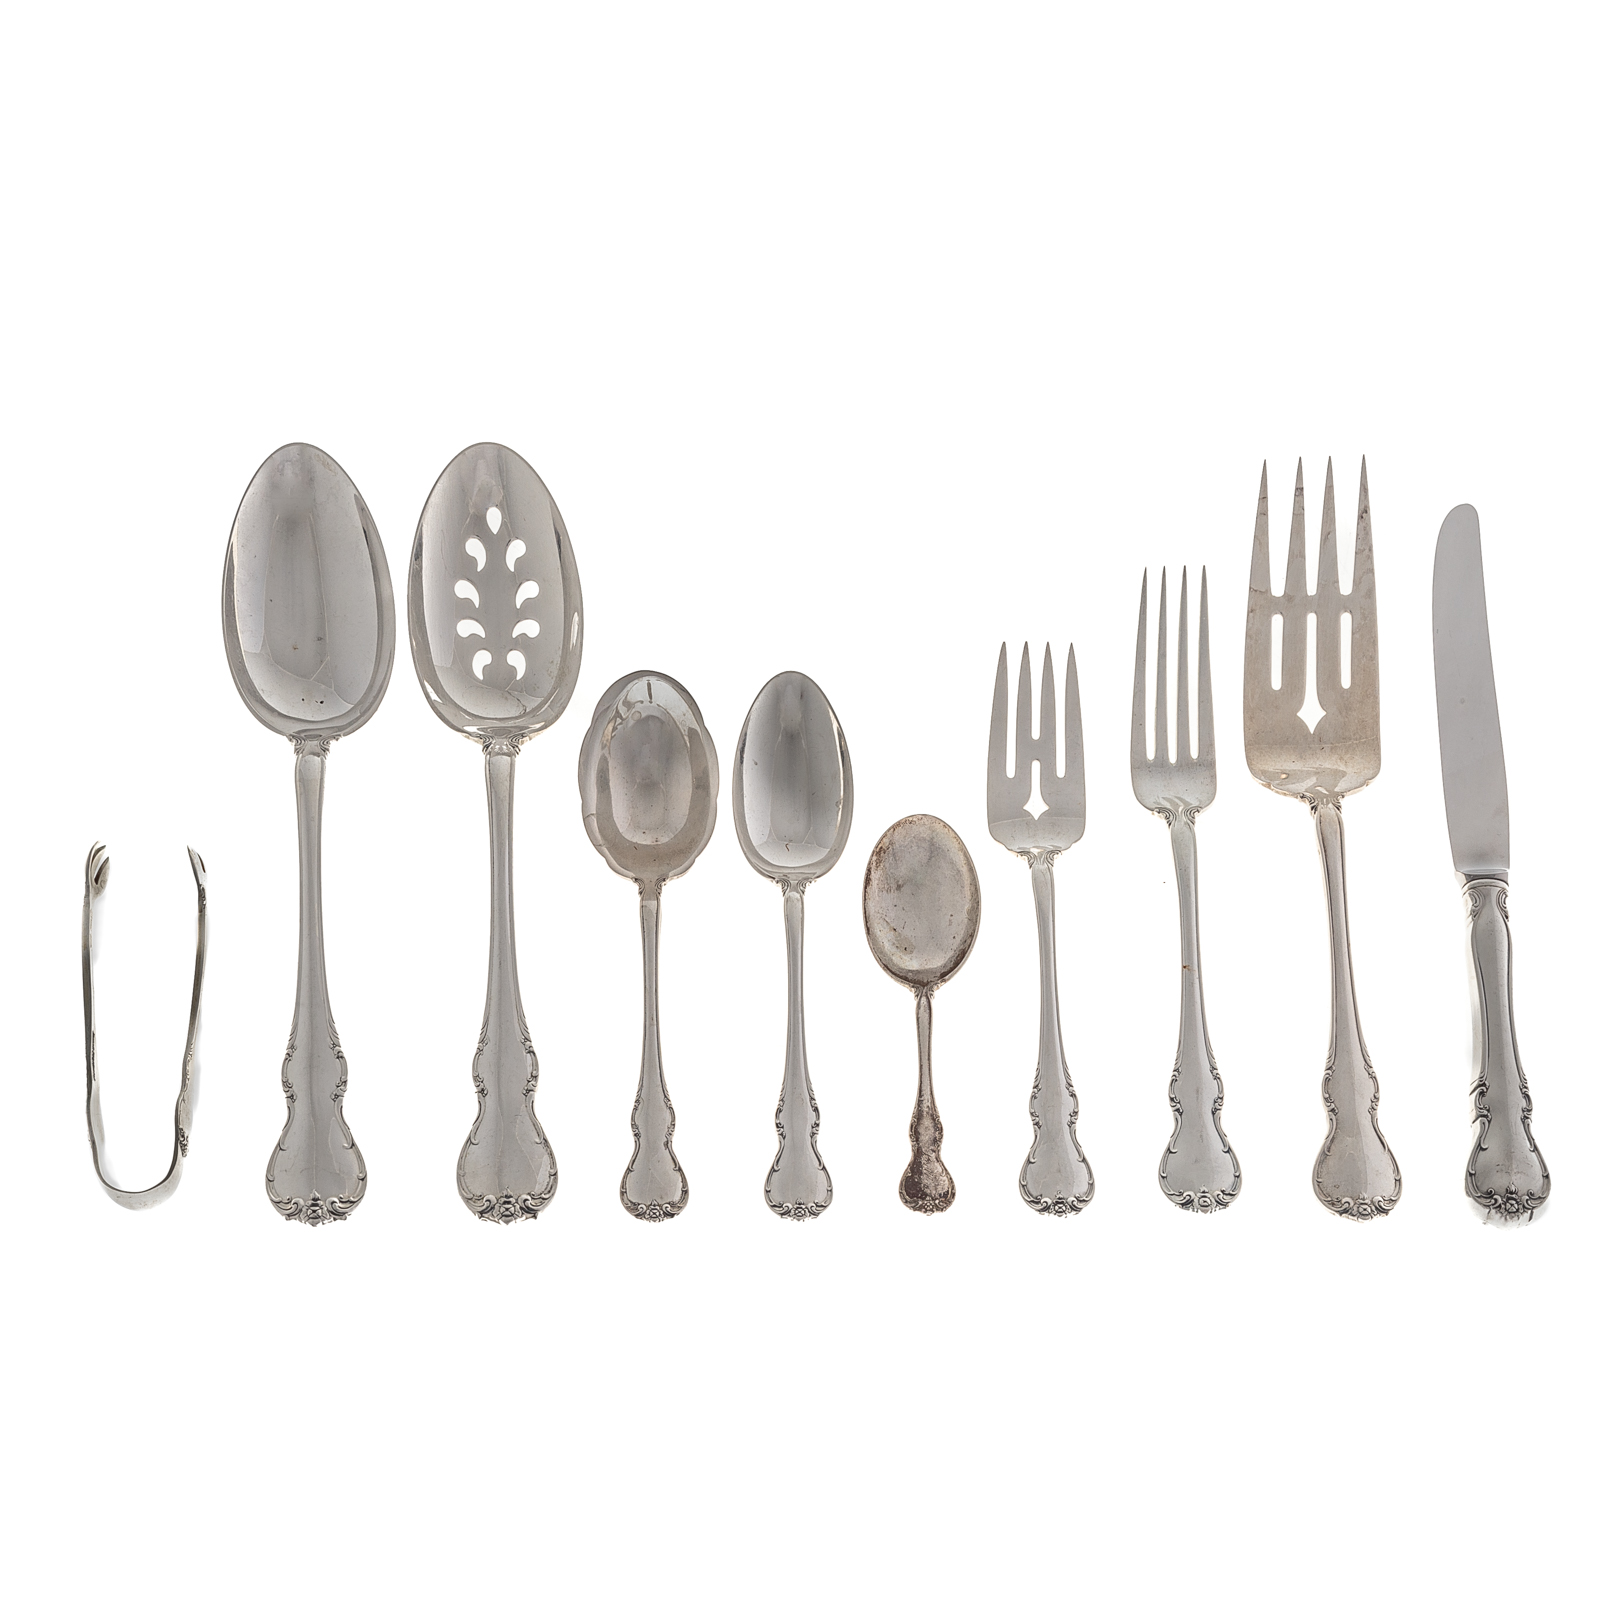 TOWLE STERLING FRENCH PROVINCIAL  33590d